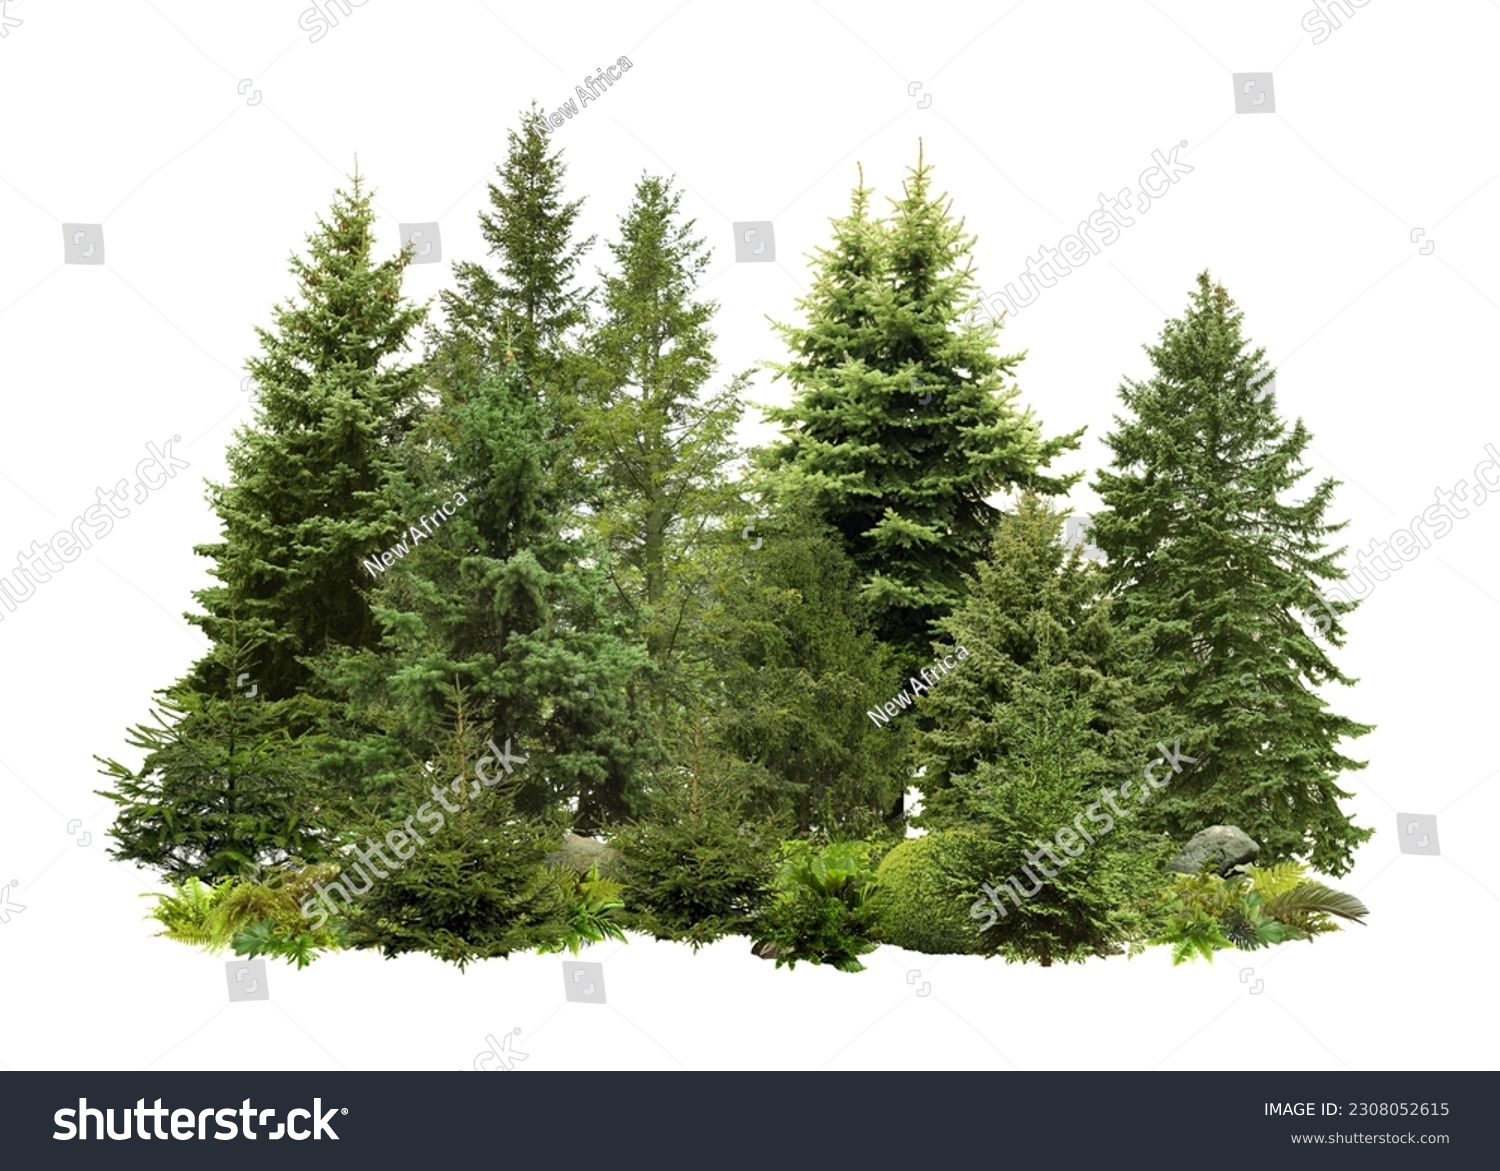 Different green trees and plants on white background #2308052615